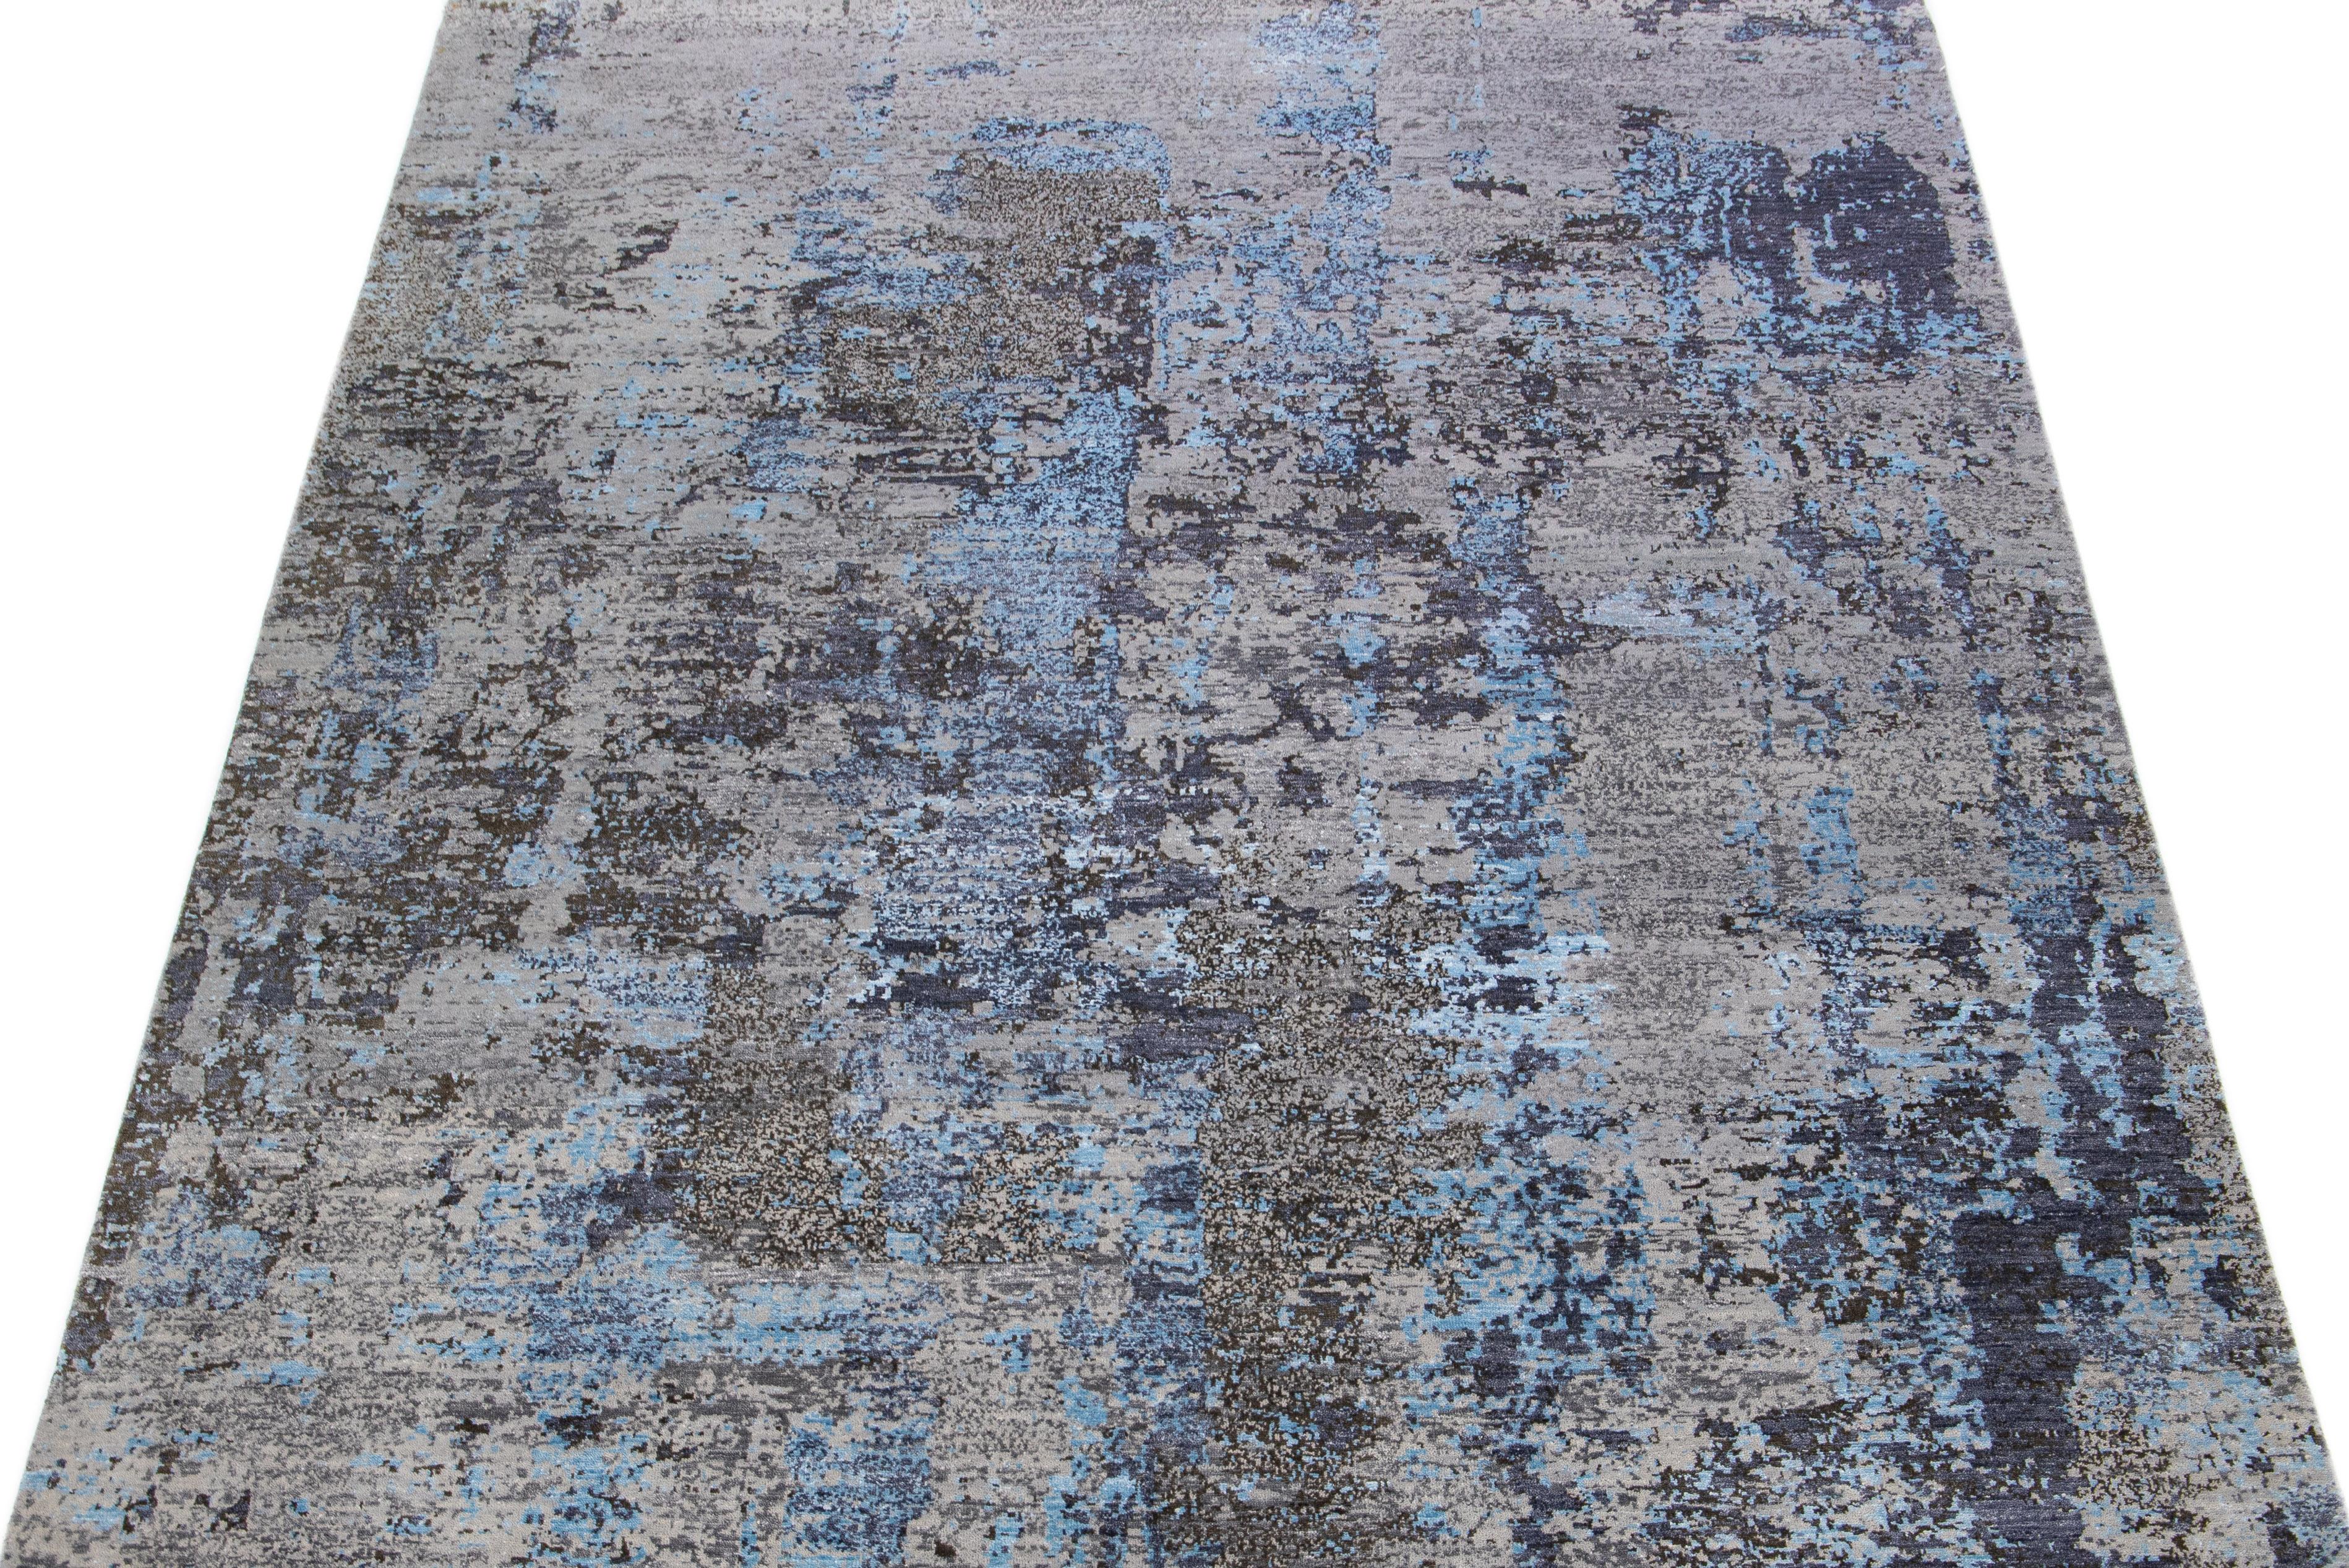 This Indian wool and silk blend rug features a gray field with an abstract pattern detailing blue colors. Its composed materials provide robustness and longevity, while its ornamental design infuses any room with sophistication.

This rug measures